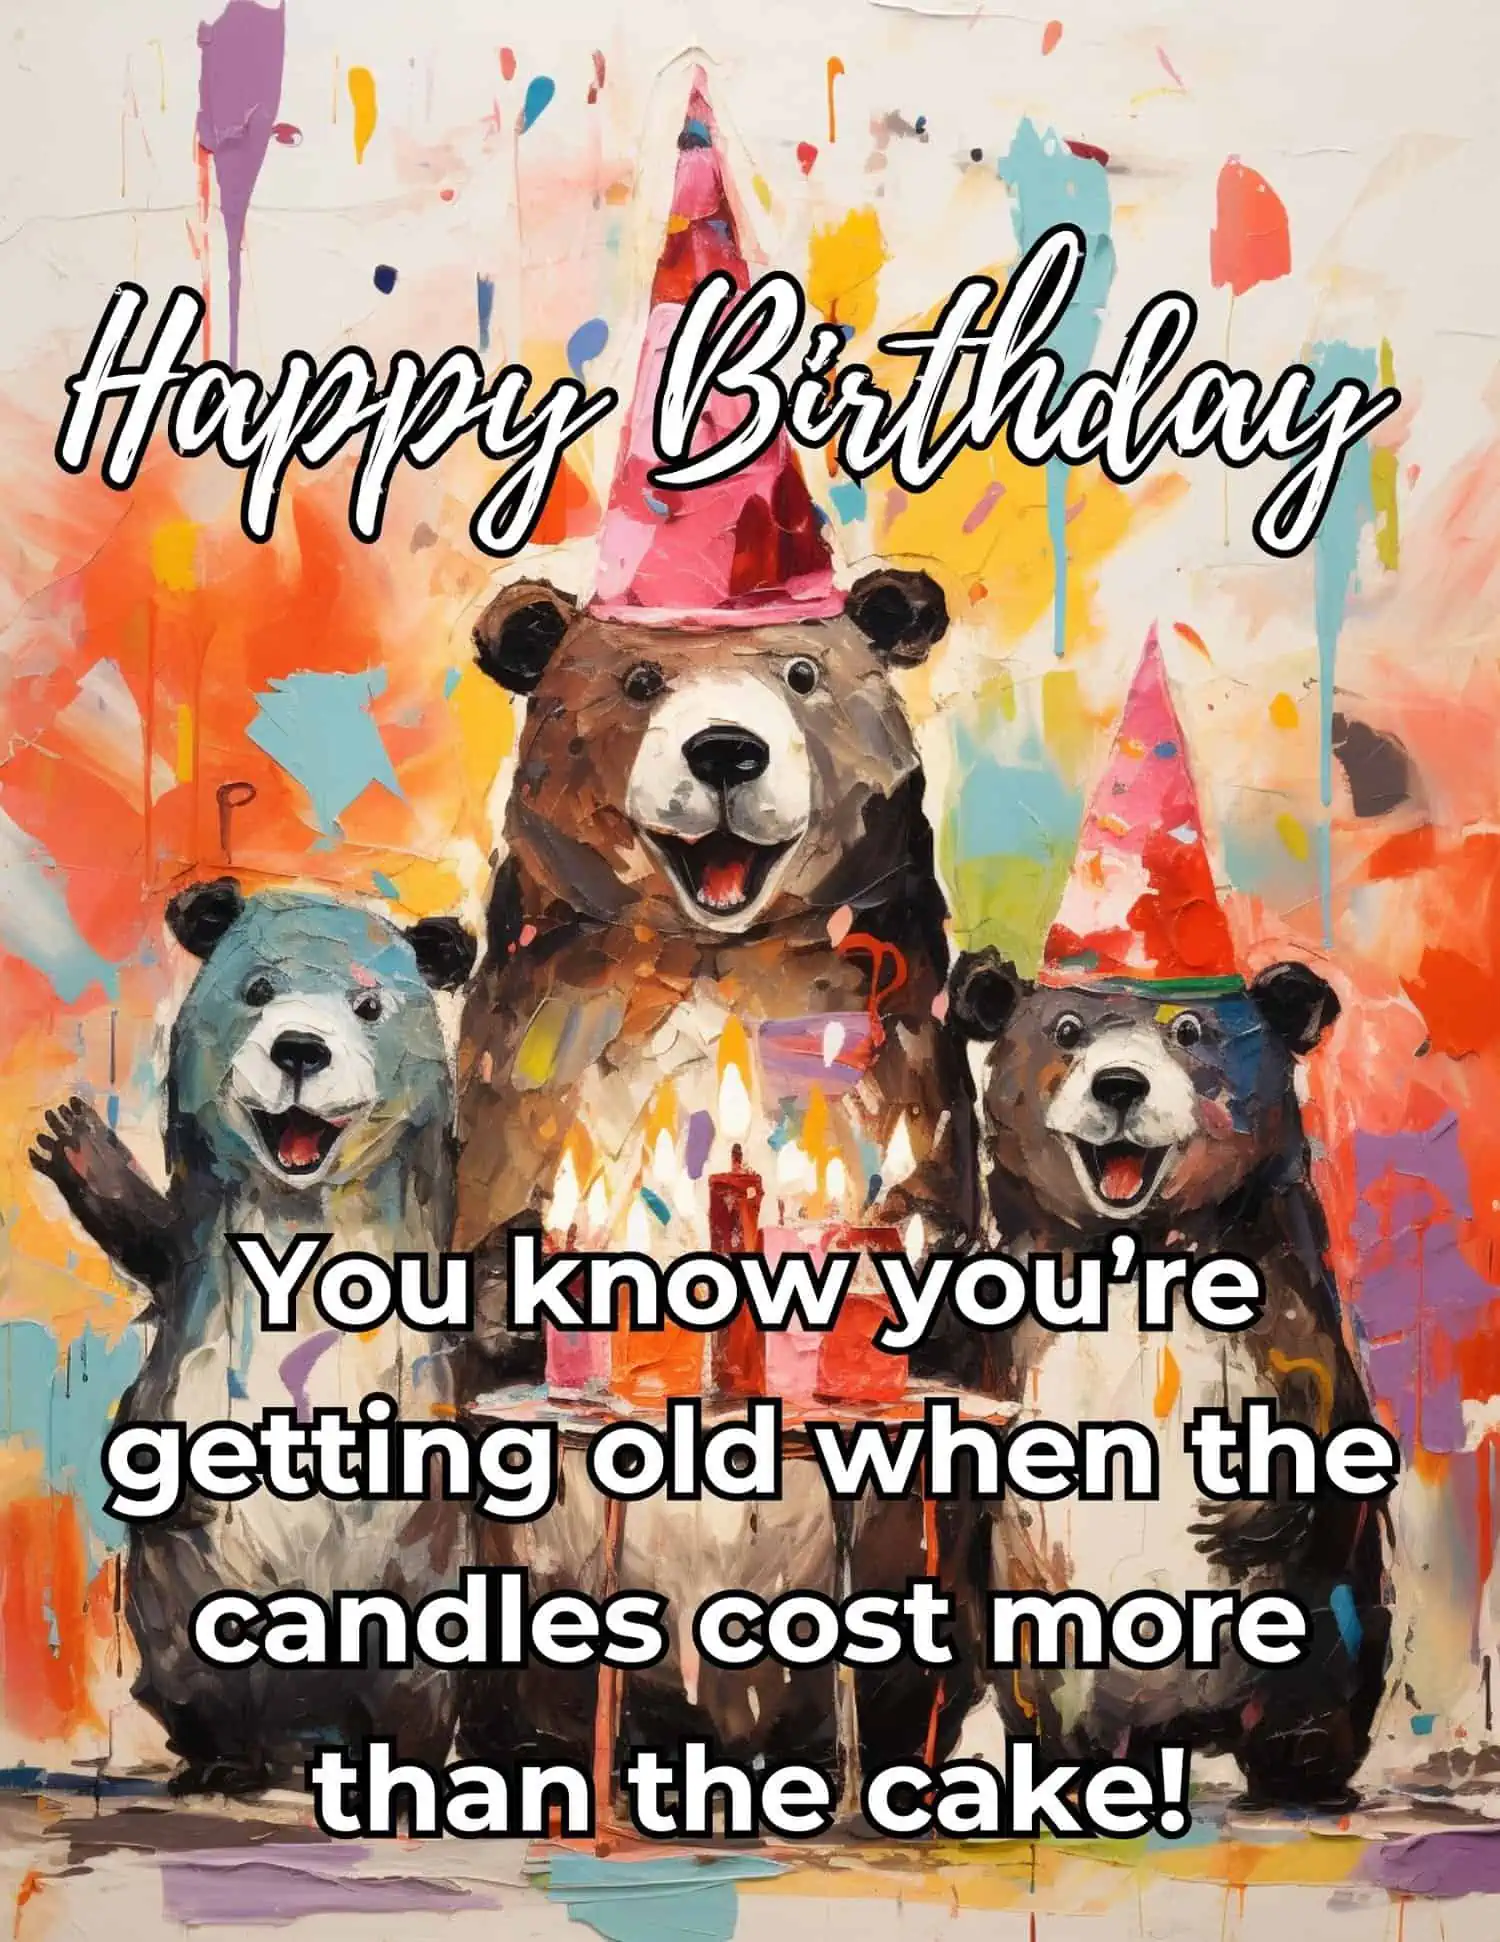 A collection of funny birthday wishes to tickle your friend's funny bone on their special day.